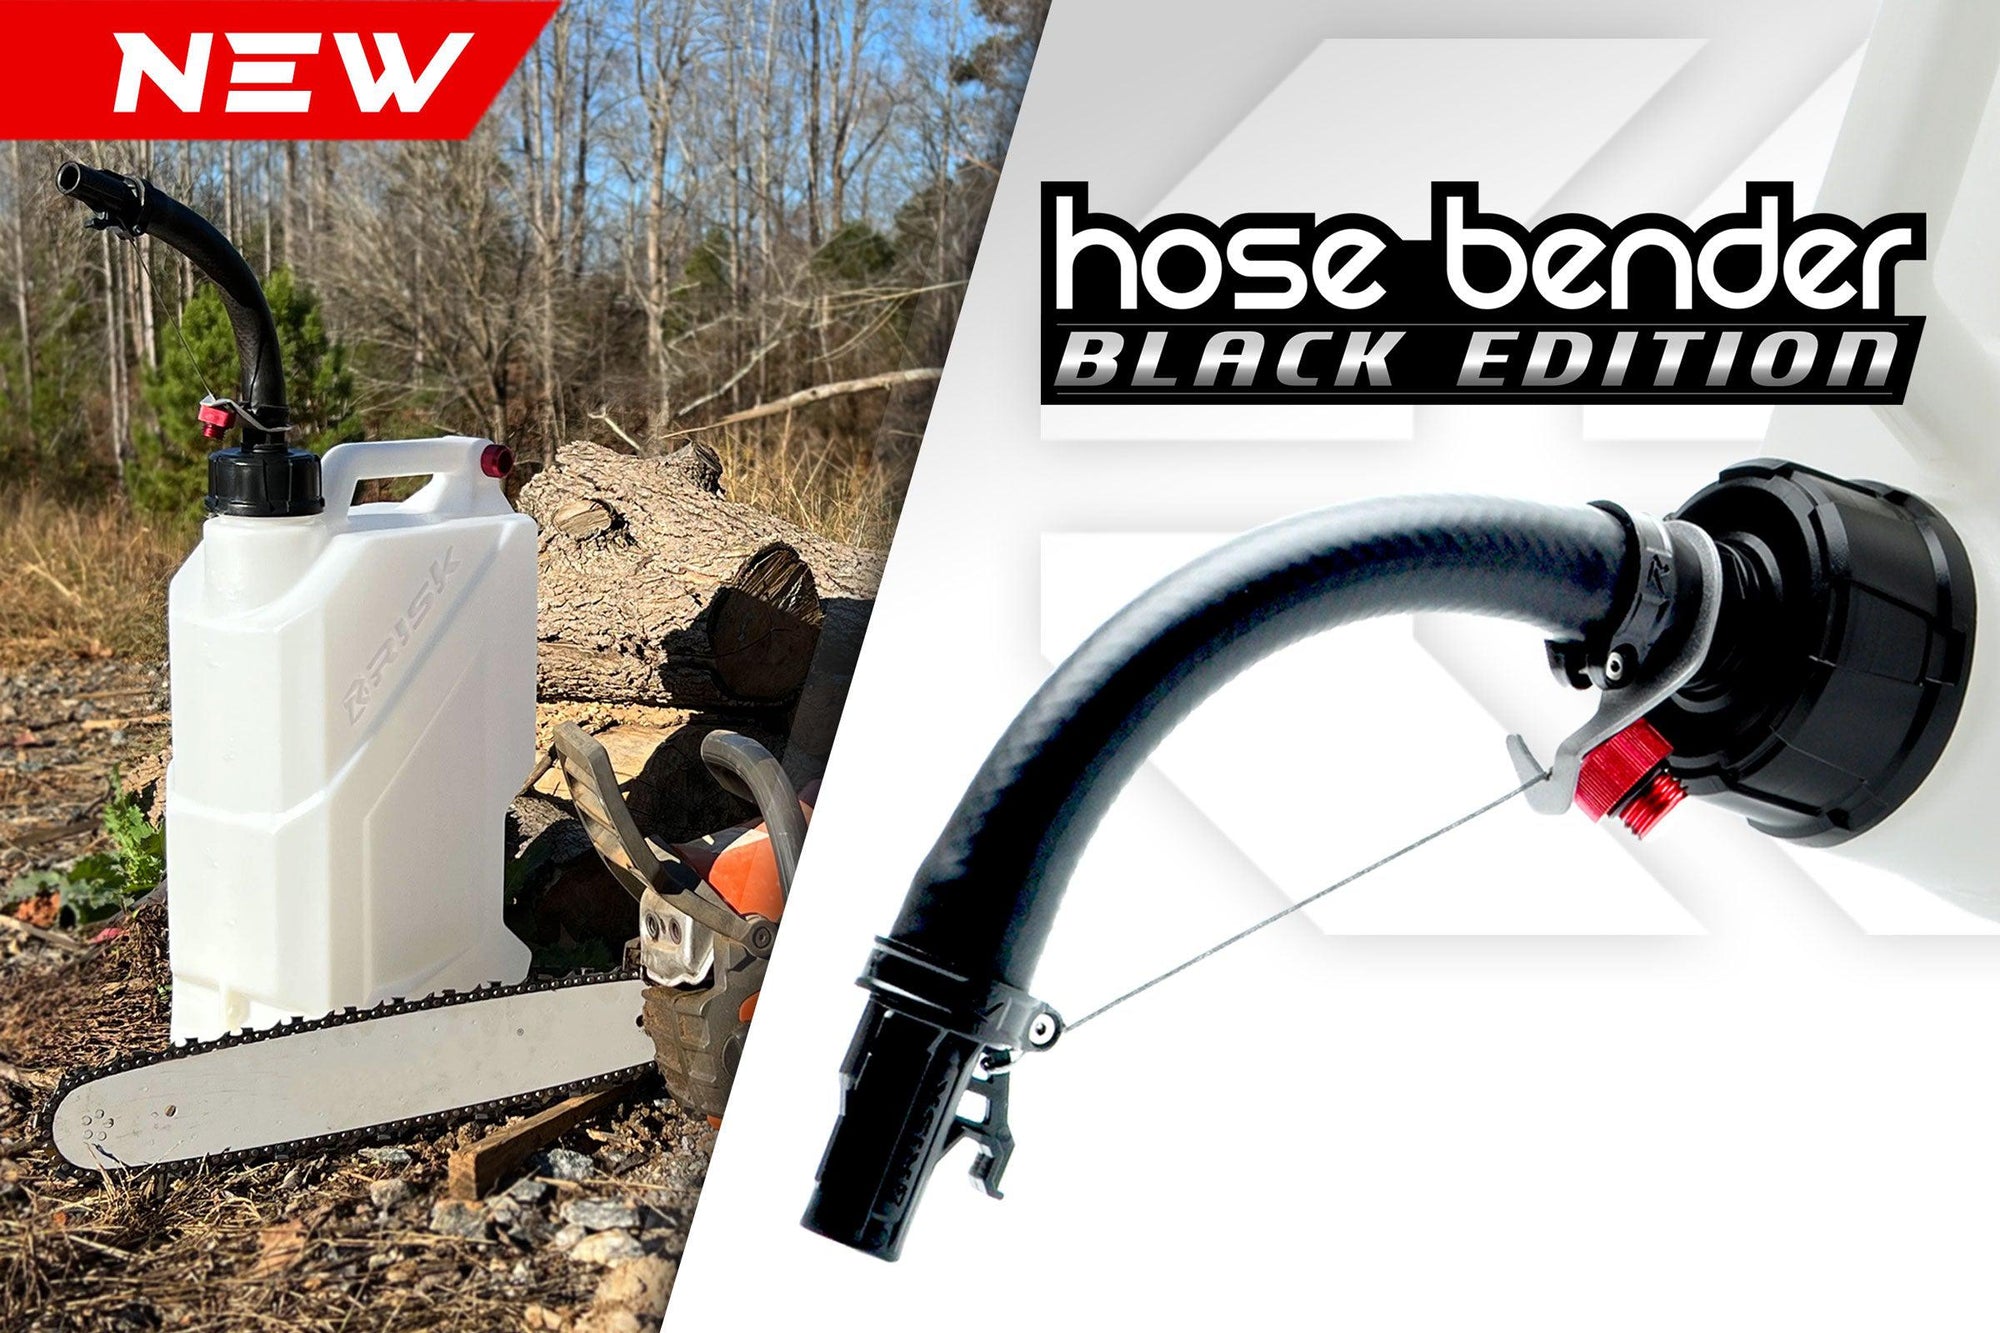 Hose Bender Black Edition home page banner featuring lifestyle and studio pics